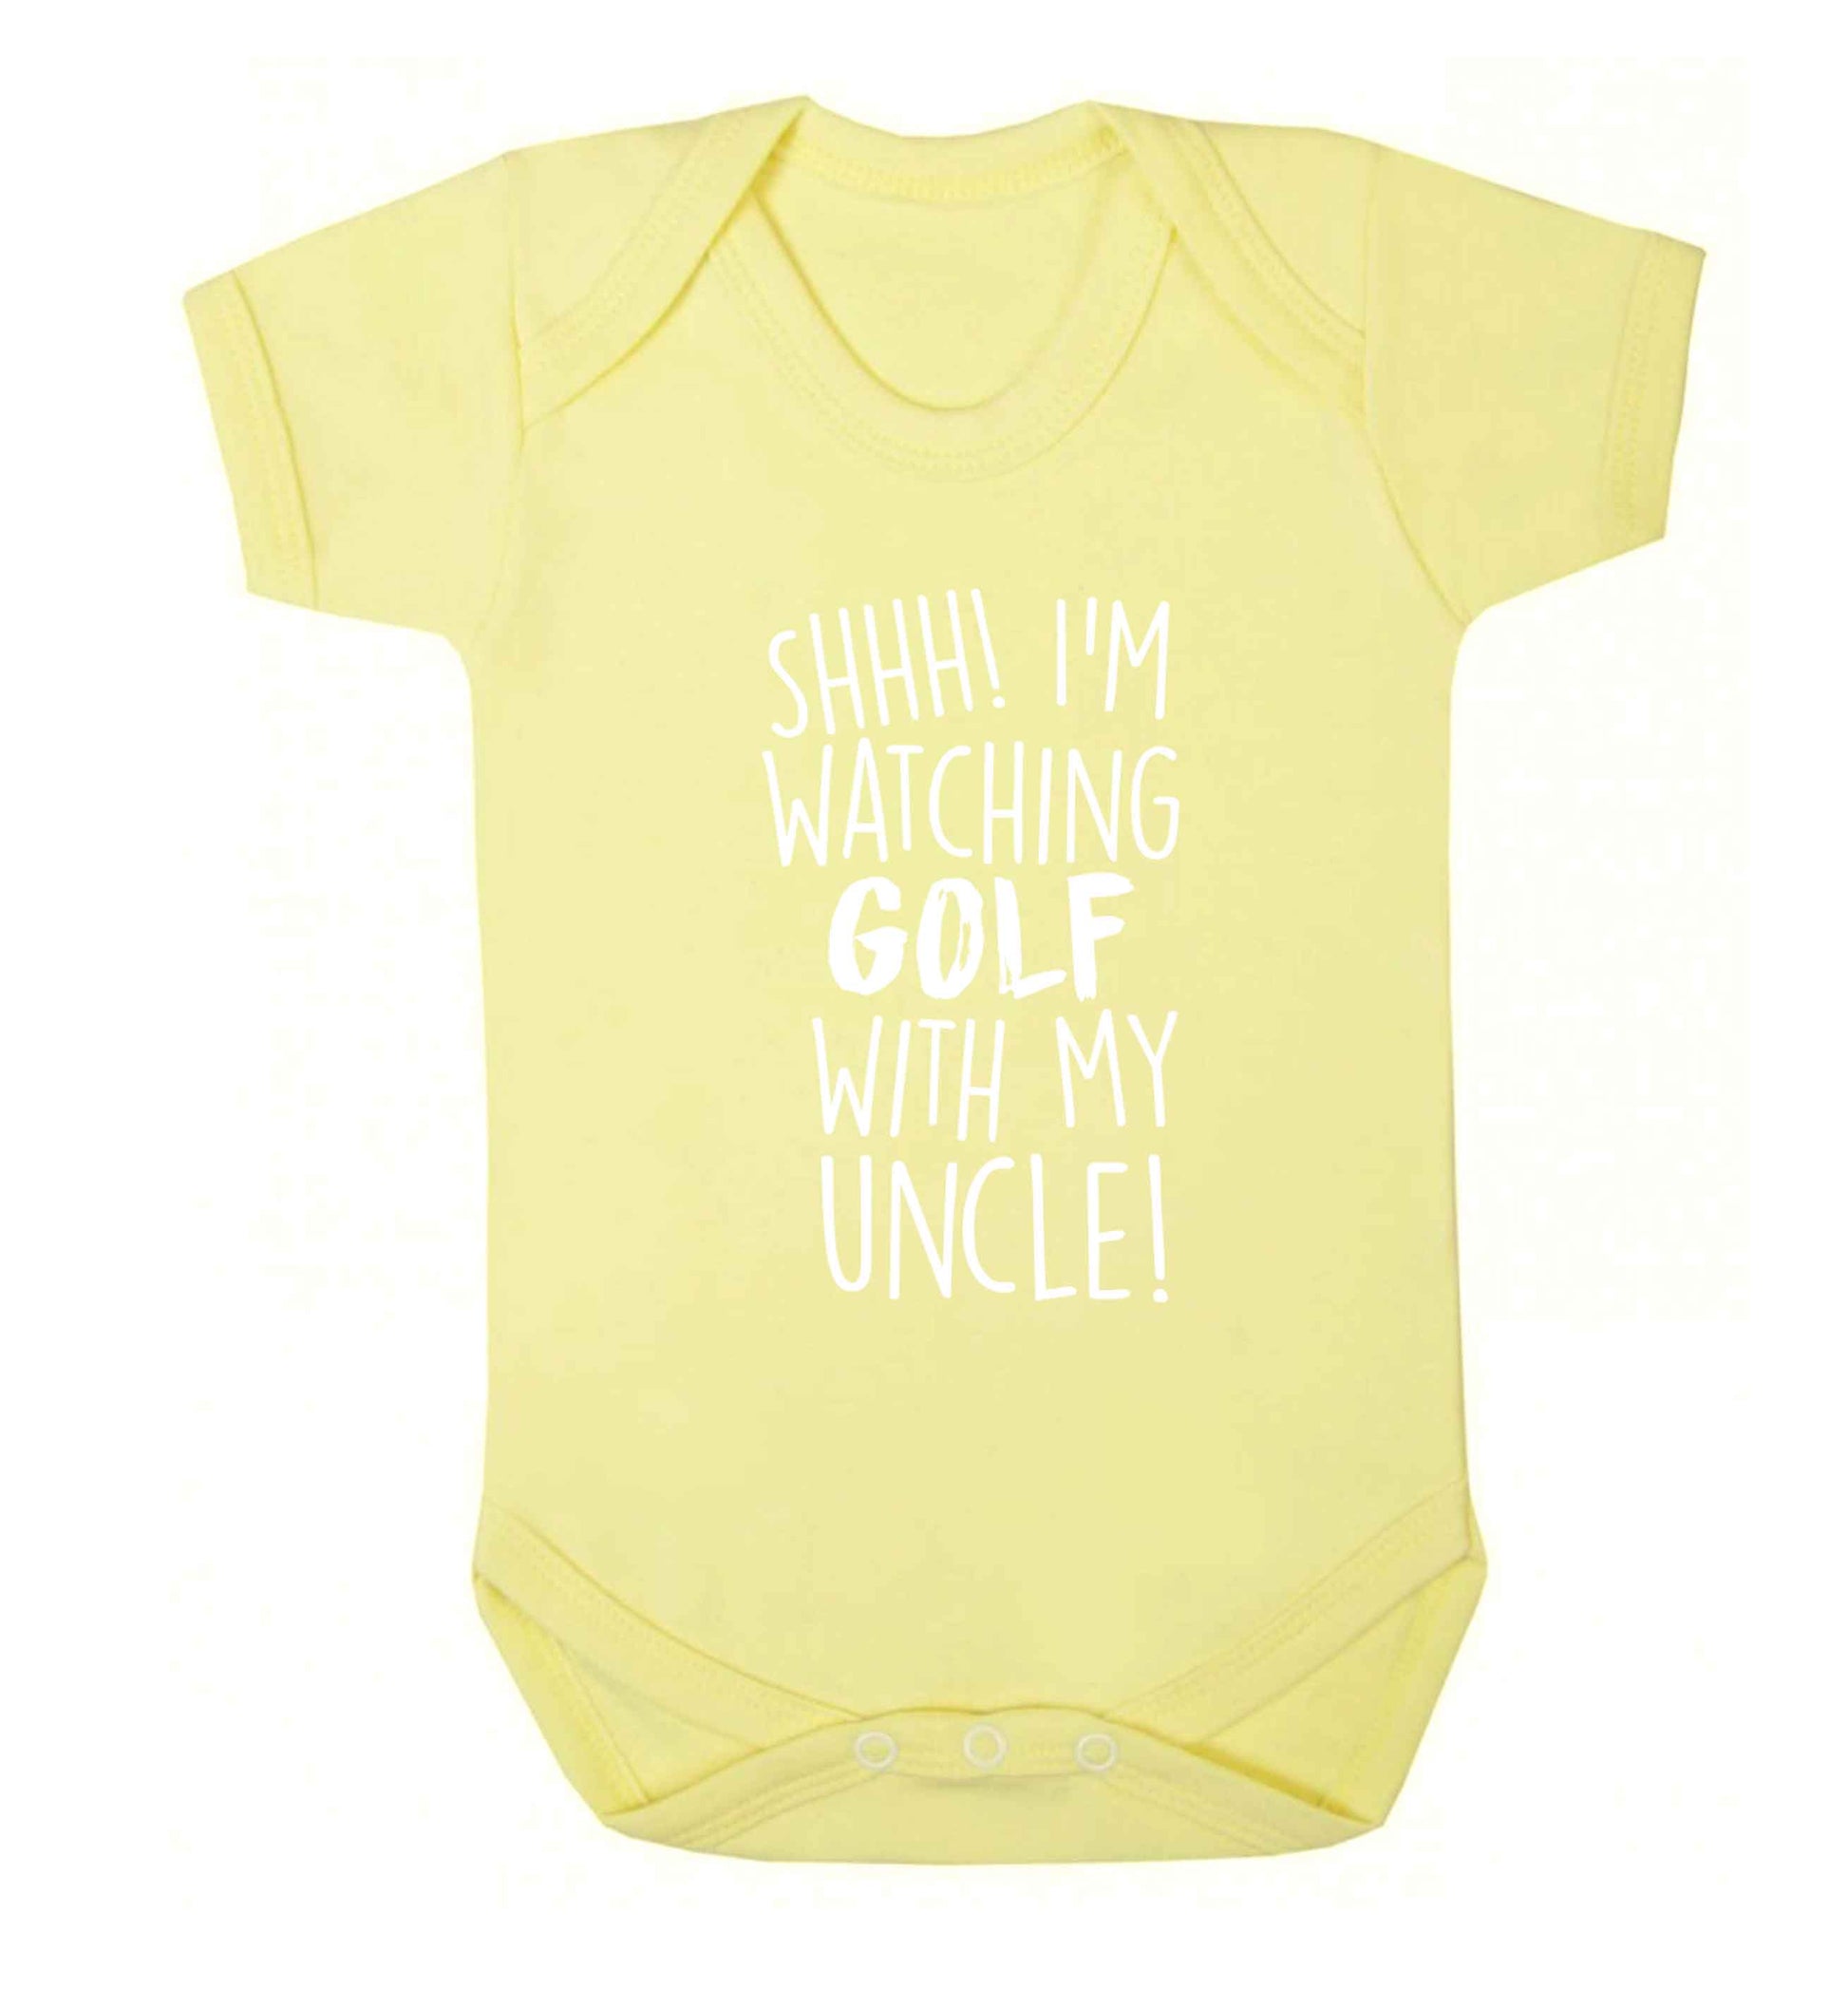 Shh I'm watching golf with my uncle Baby Vest pale yellow 18-24 months